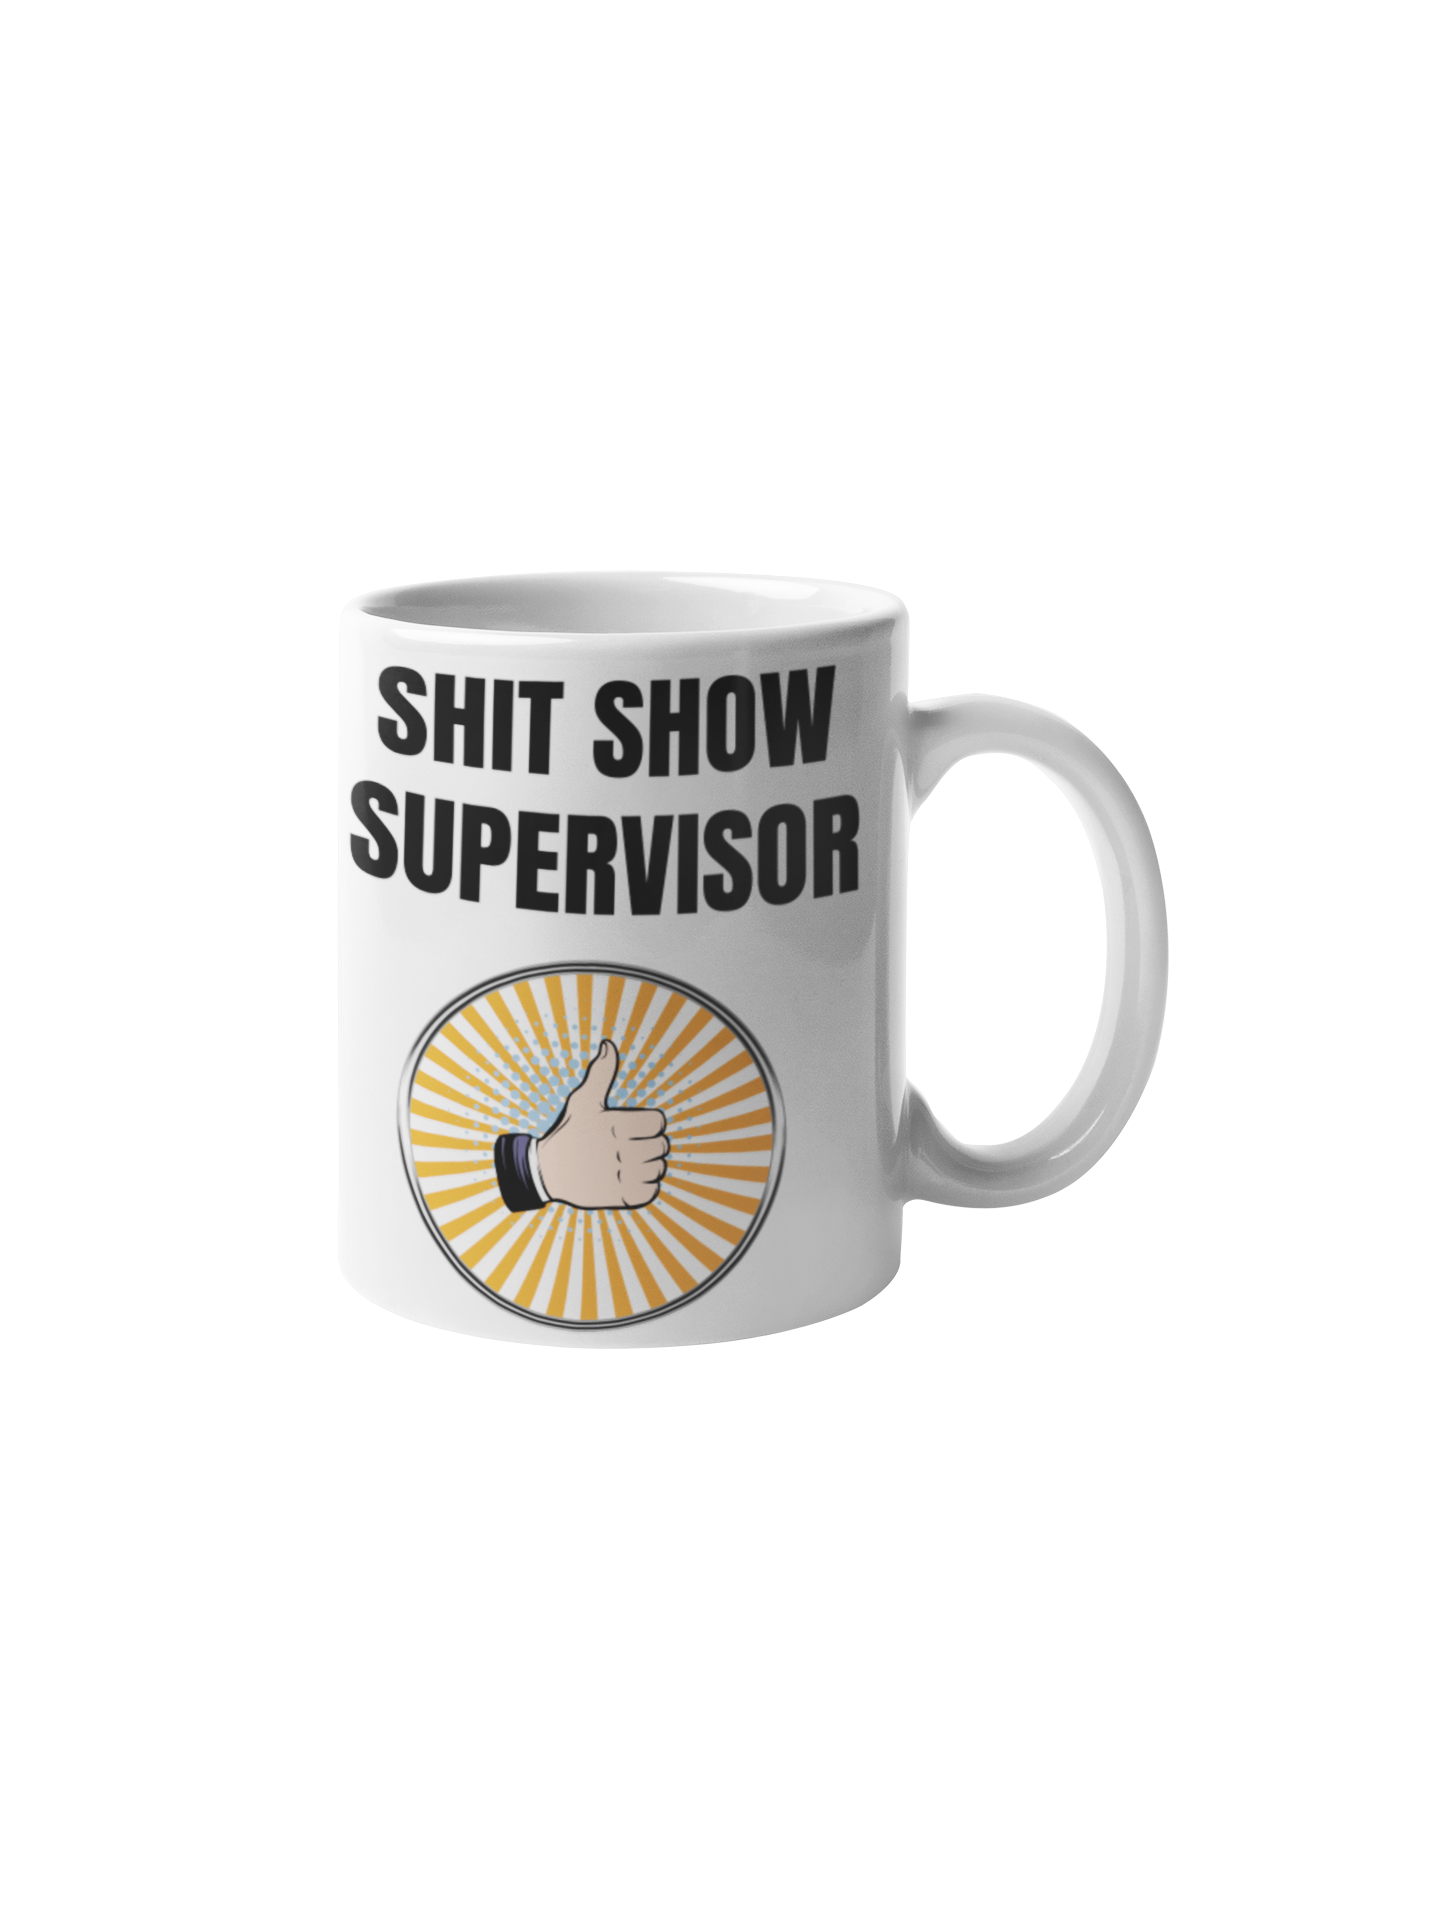 S#it show supervisor - White glossy mug gift for mom gift for sister gift for wife holiday shit show